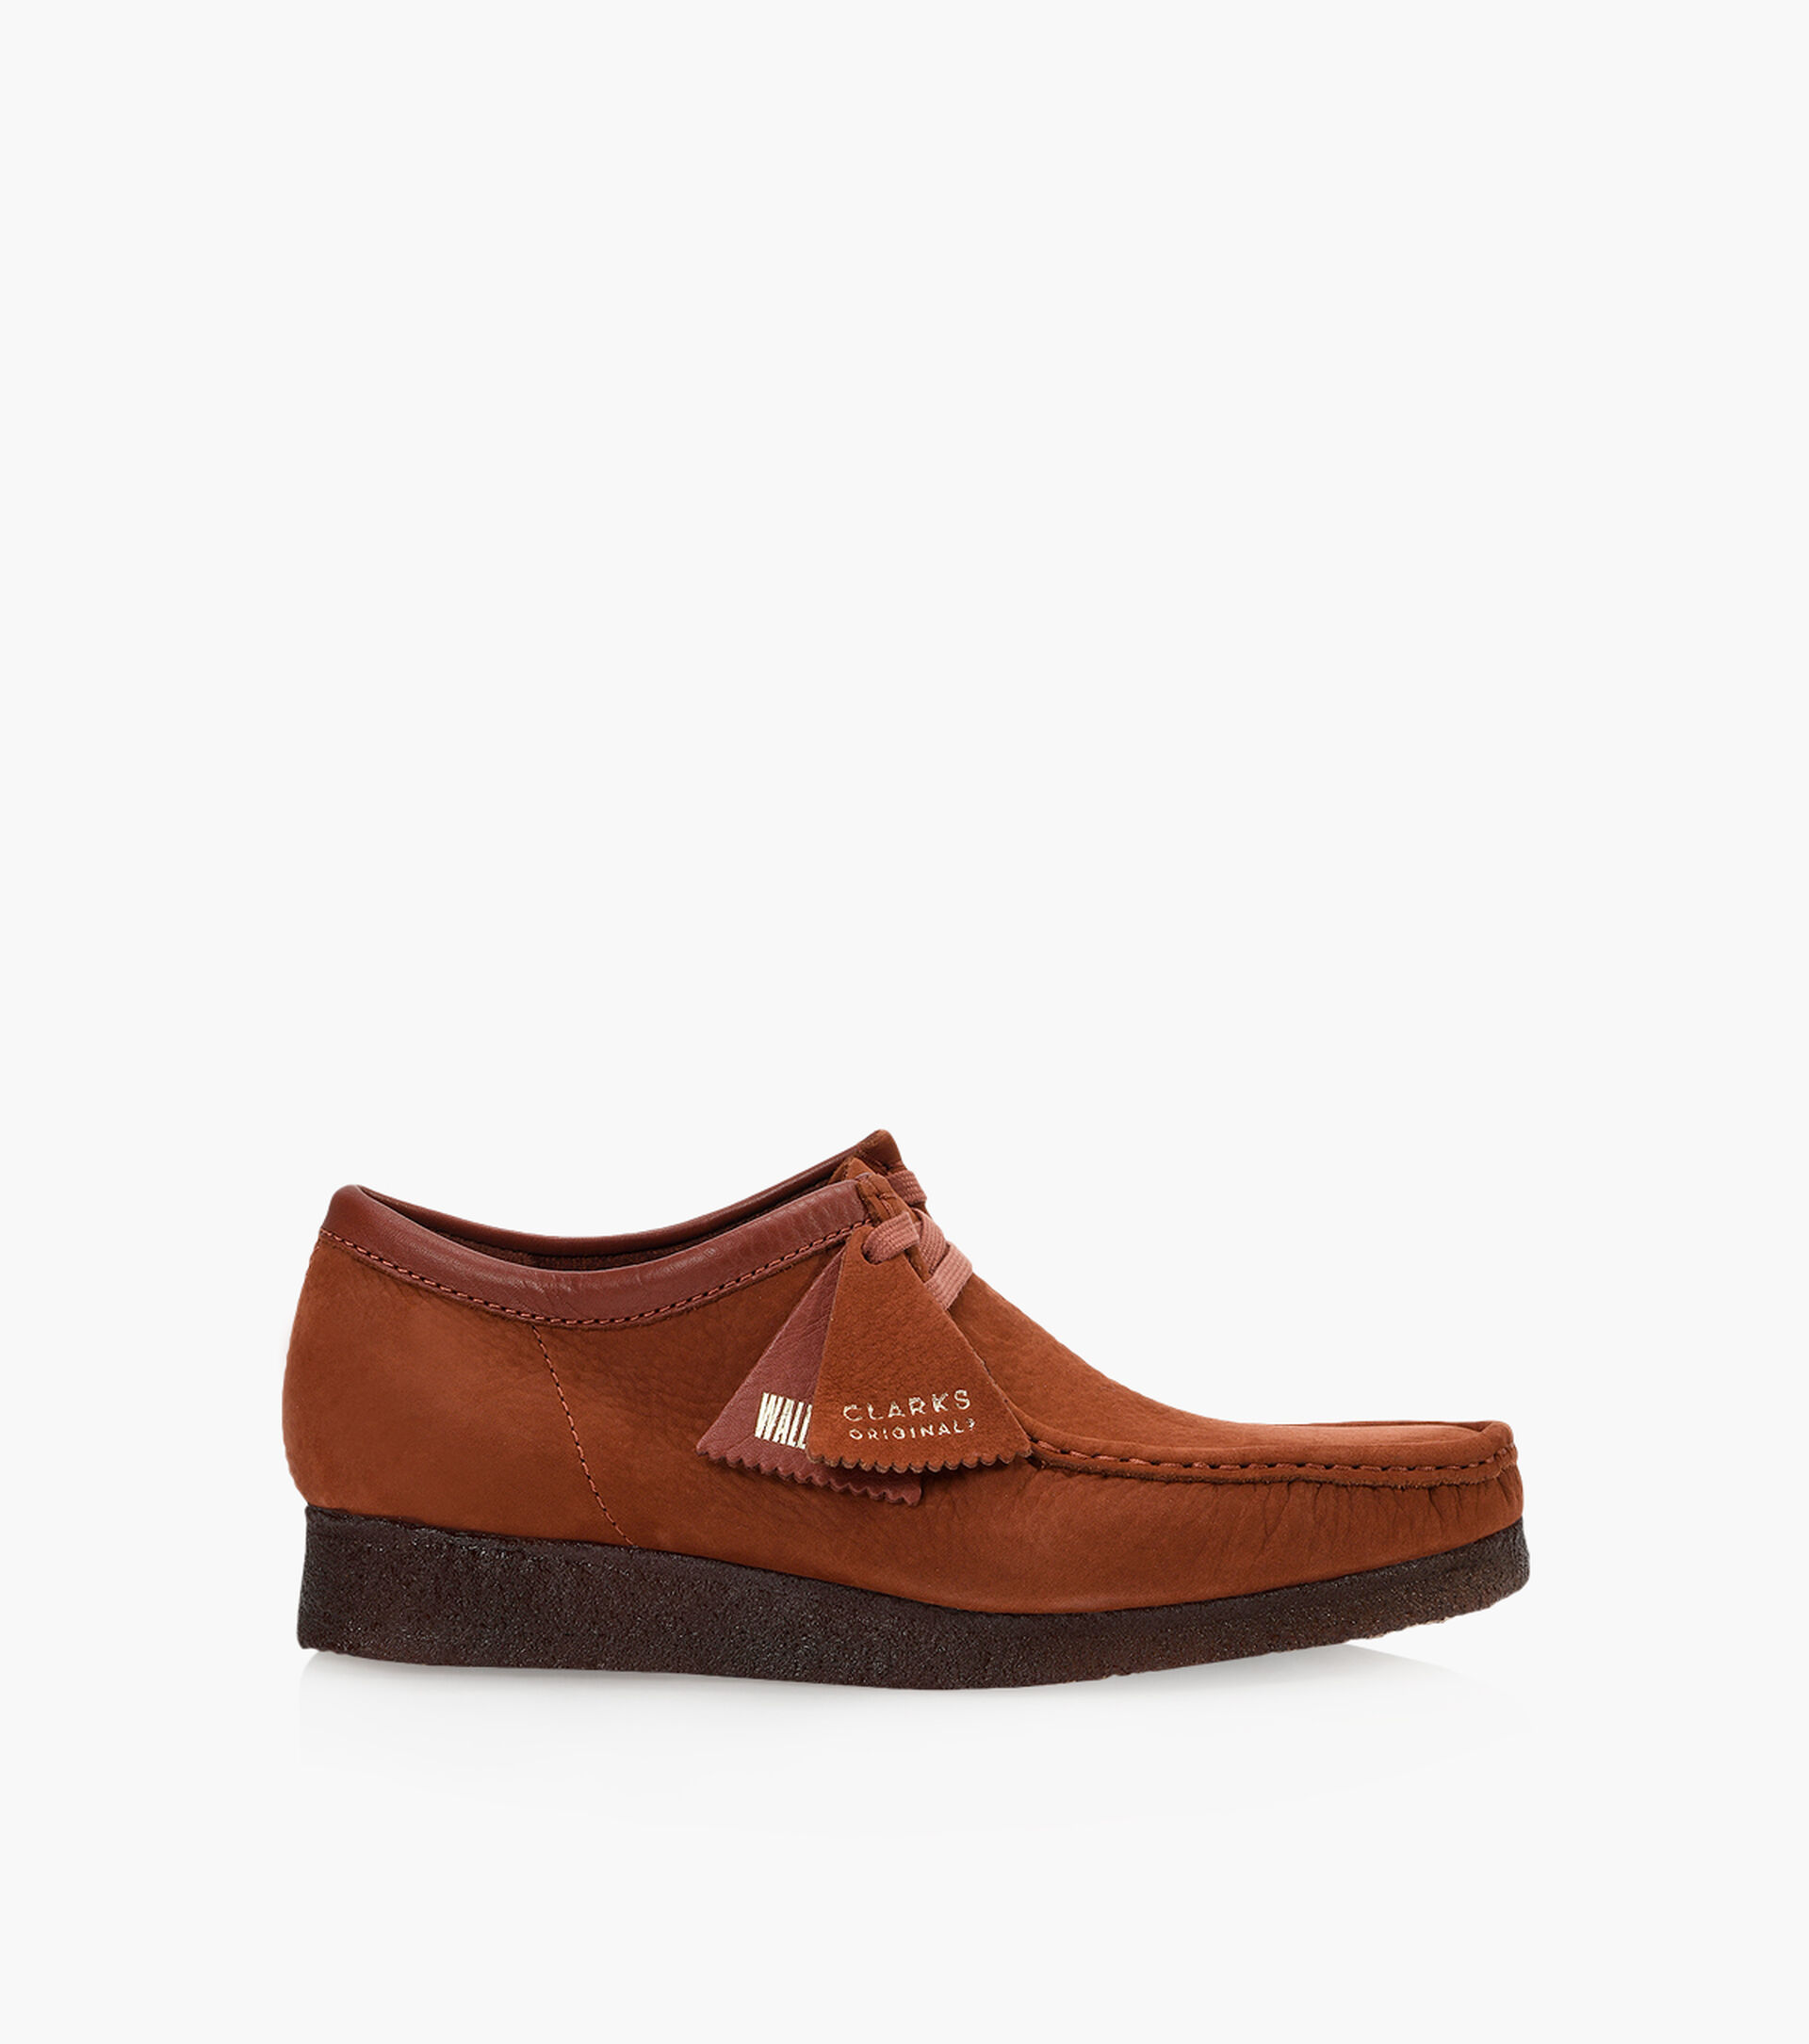 CLARKS ORIGINALS WALLABEE - Burgundy Leather | Browns Shoes